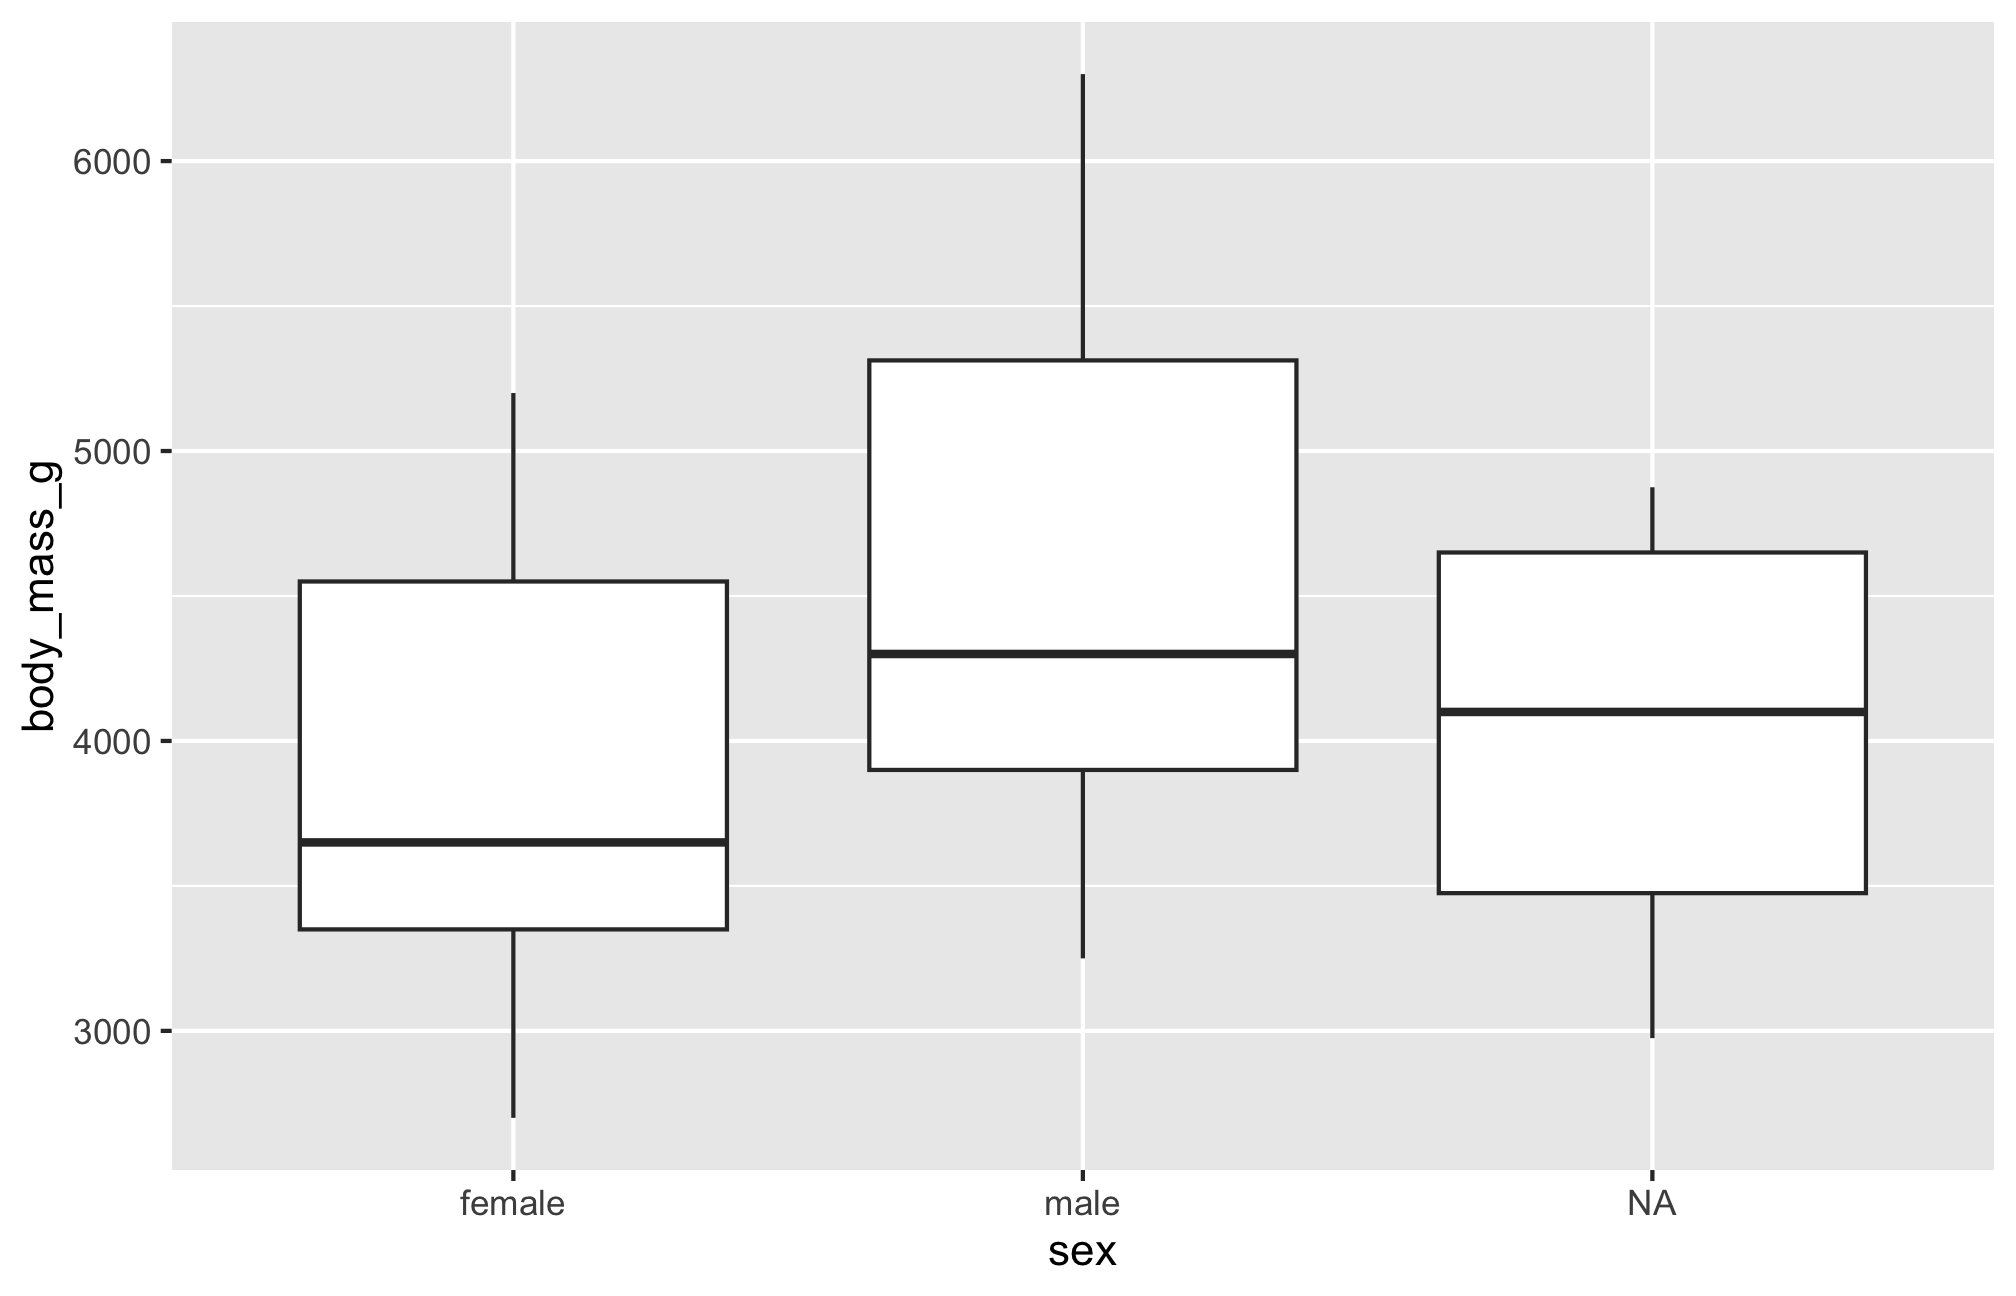 A boxplot with penguin sex along the x axis and body mass along the y axis. Again, the three sex categories are female, male, and NA, and the body mass appears to range between 2400g and 6500g. Because this is a boxplot, we can visualize the minimum value, first quartile, median, third quartile, and maximum value of penguin body mass, for each penguin sex category. Female penguins have a lower median body mass than male penguins, while the NA sex category is somewhere in between the two. There are no outliers.